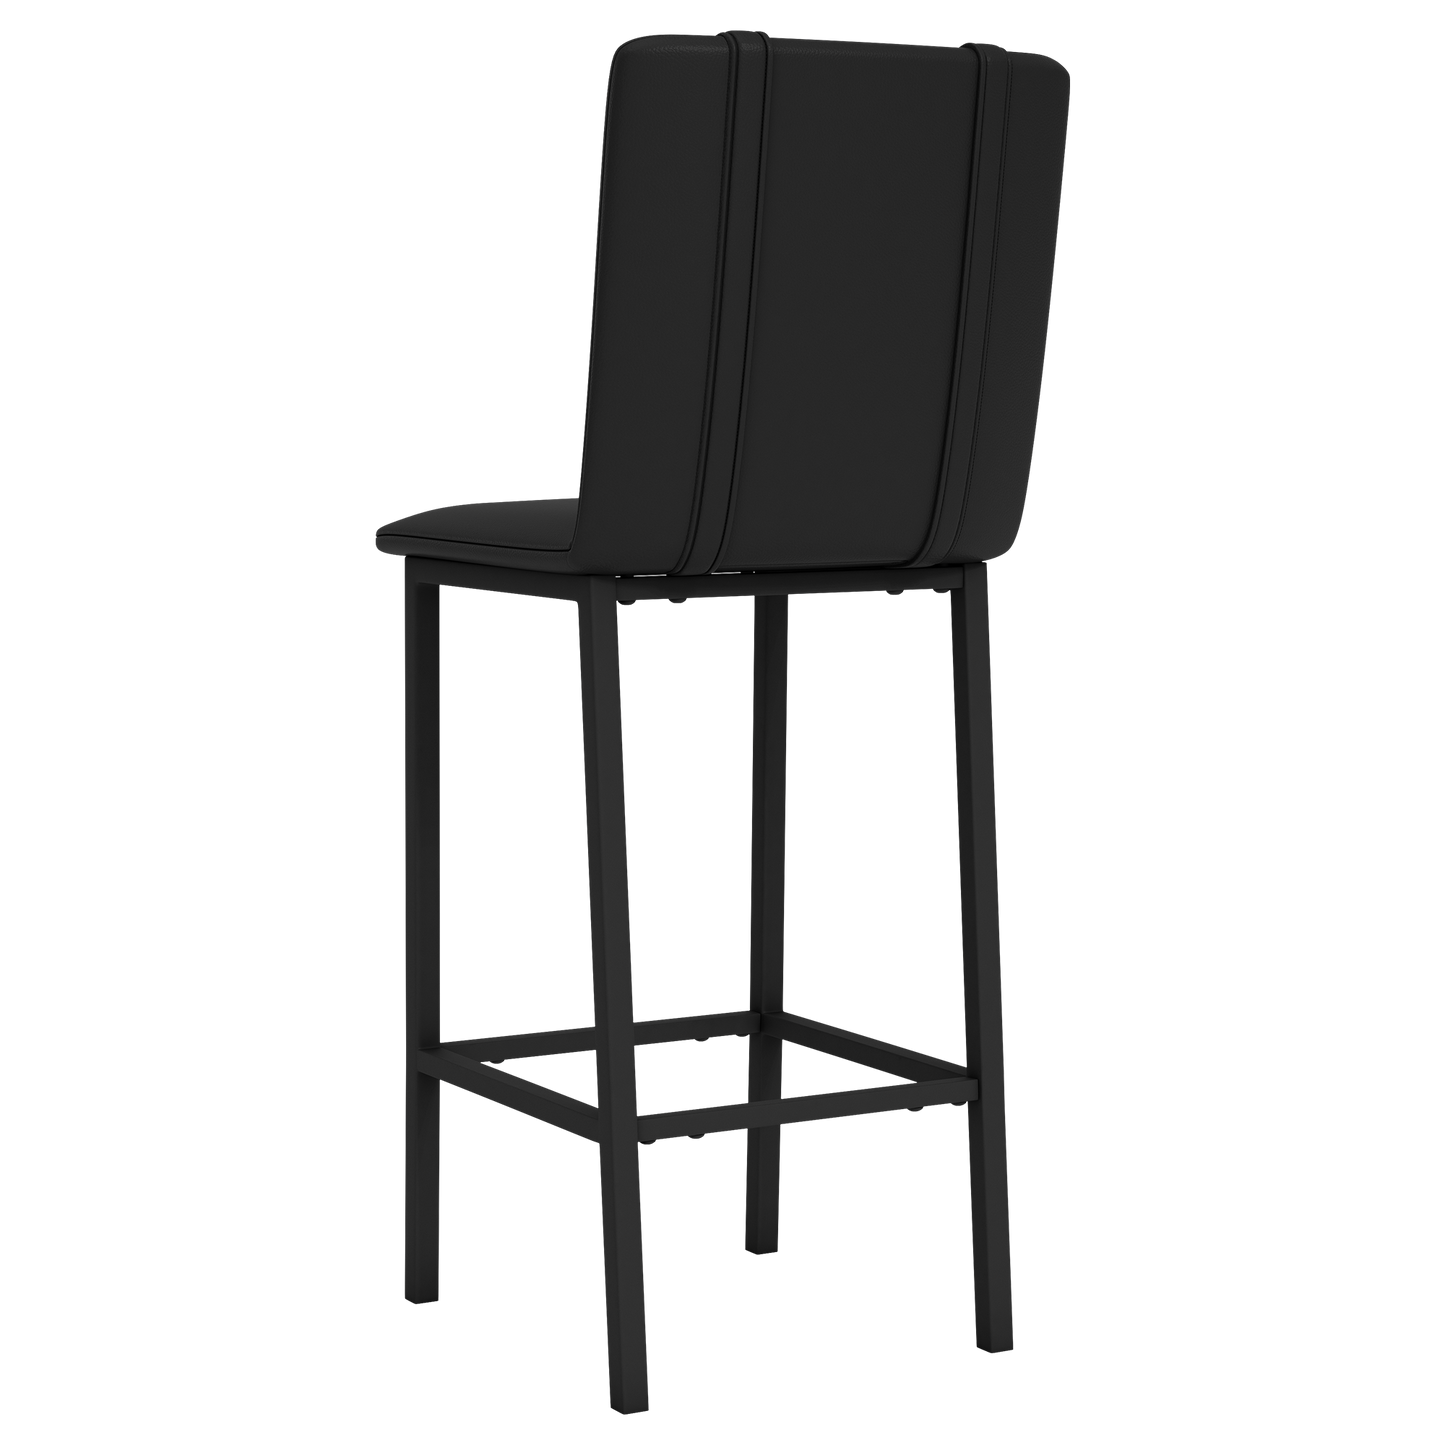 Bar Stool 500 with New Orleans Pelicans Secondary Set of 2